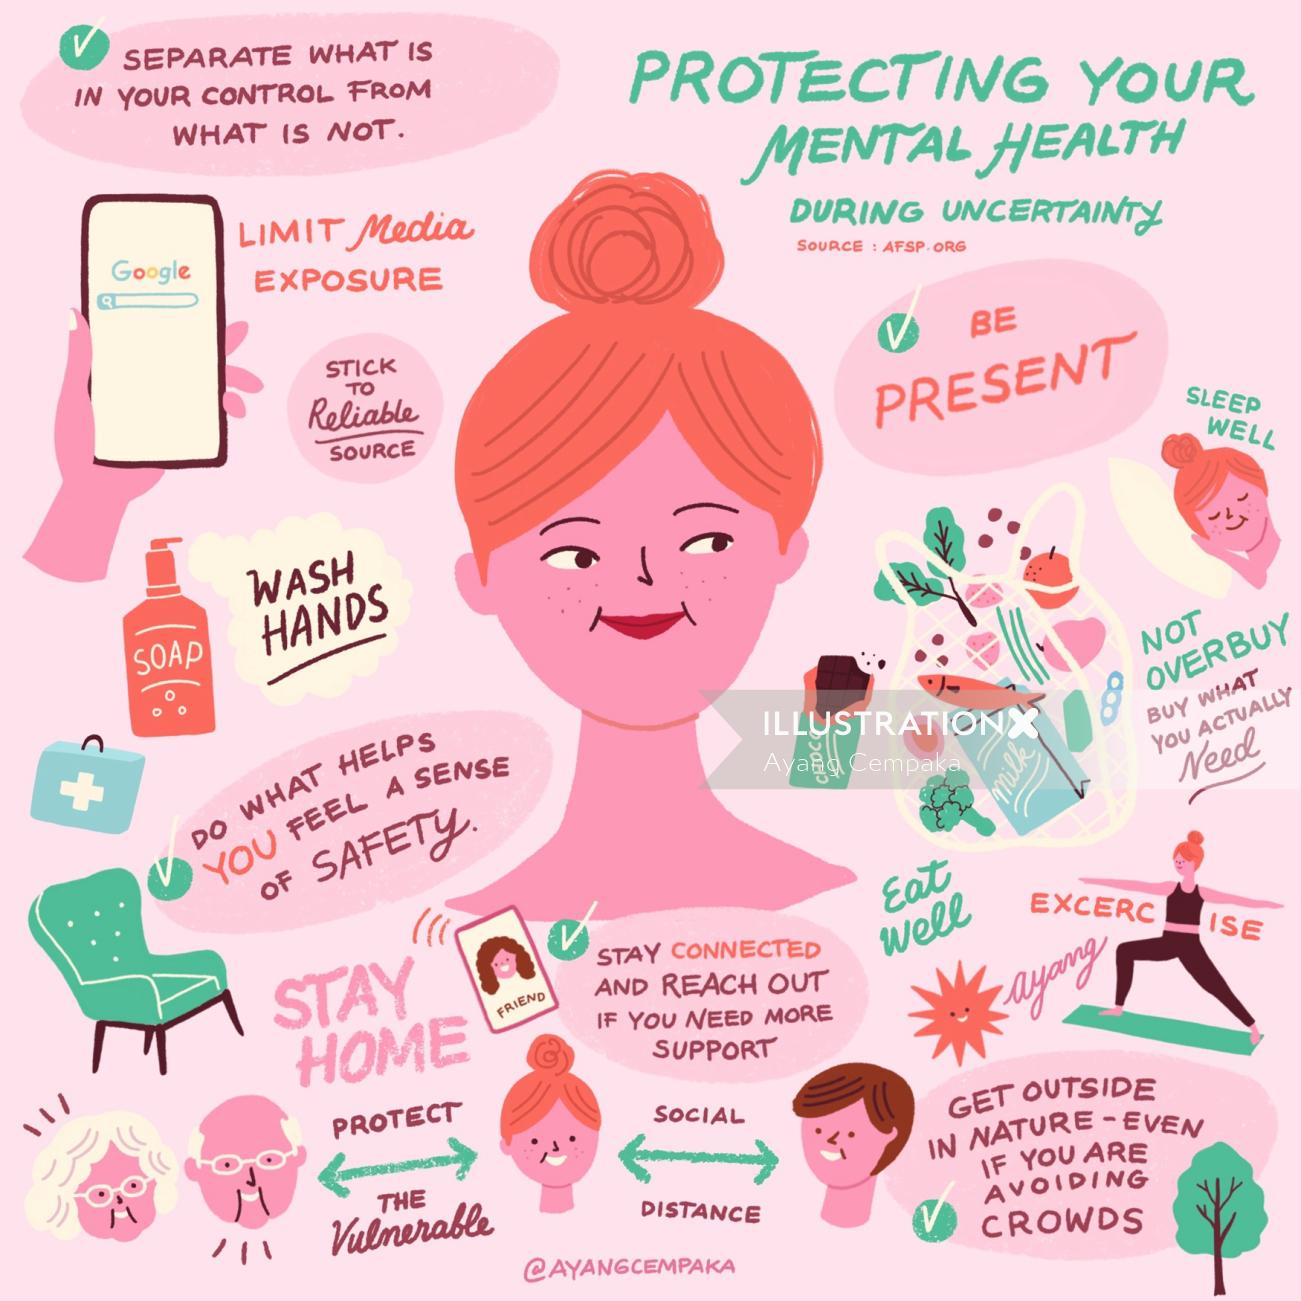 People protecting your mental health
